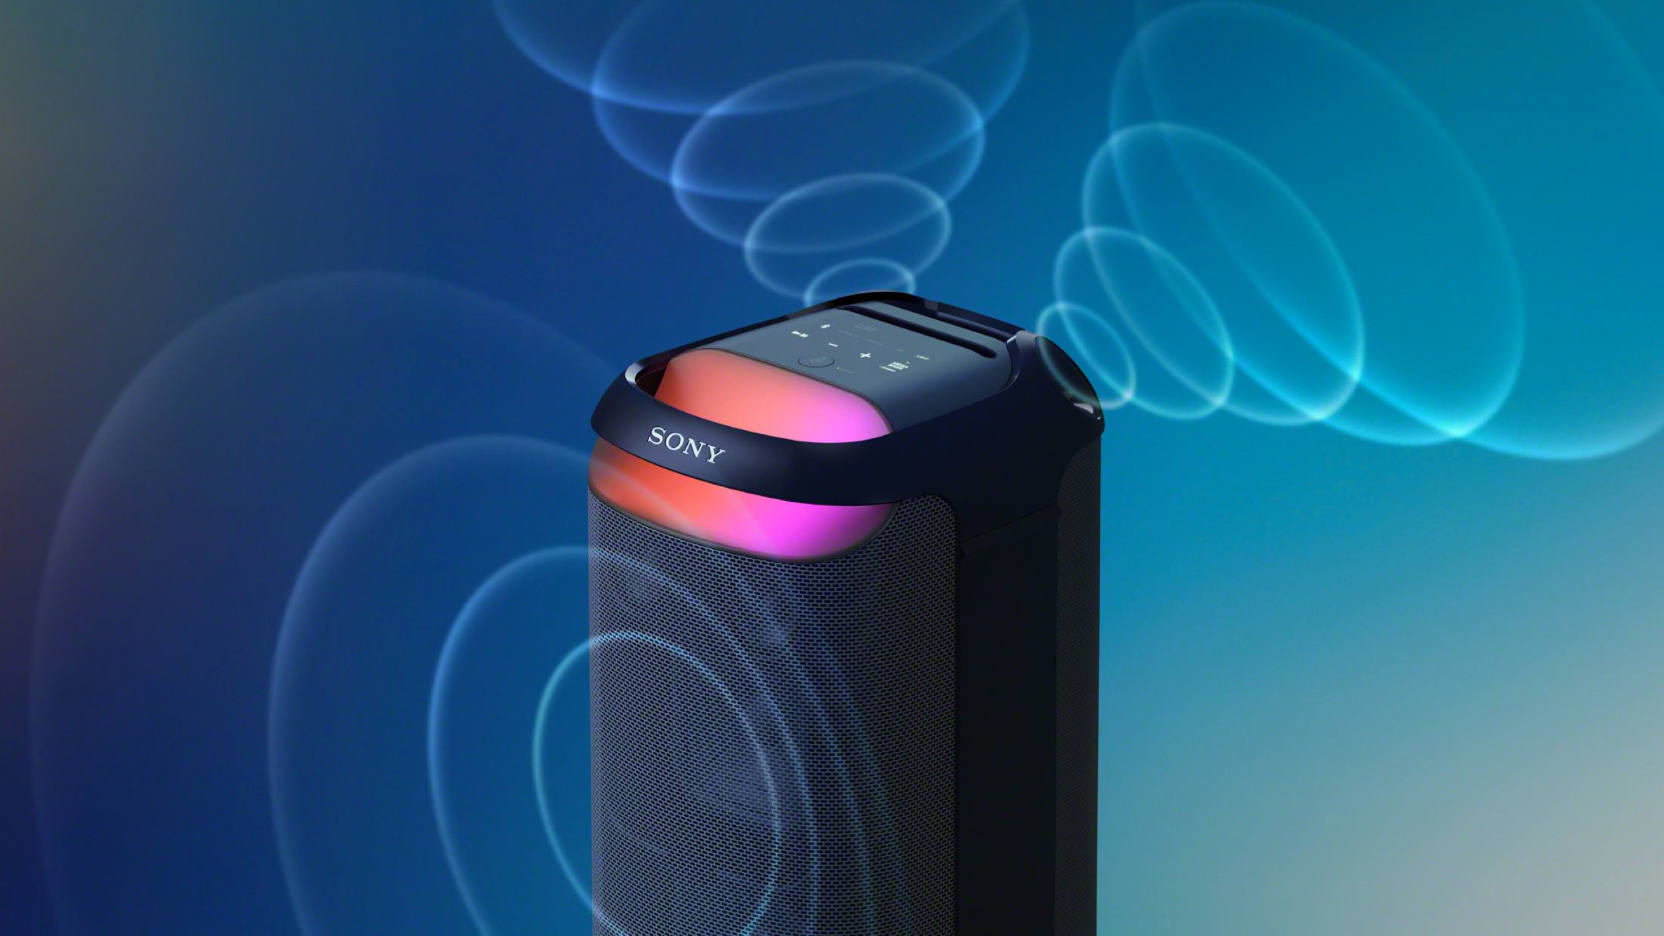 Sony SRS XB800 against a blue background, with an orange light show and a graphic of sound coming from two rear-facing tweeters and front-facing drivers